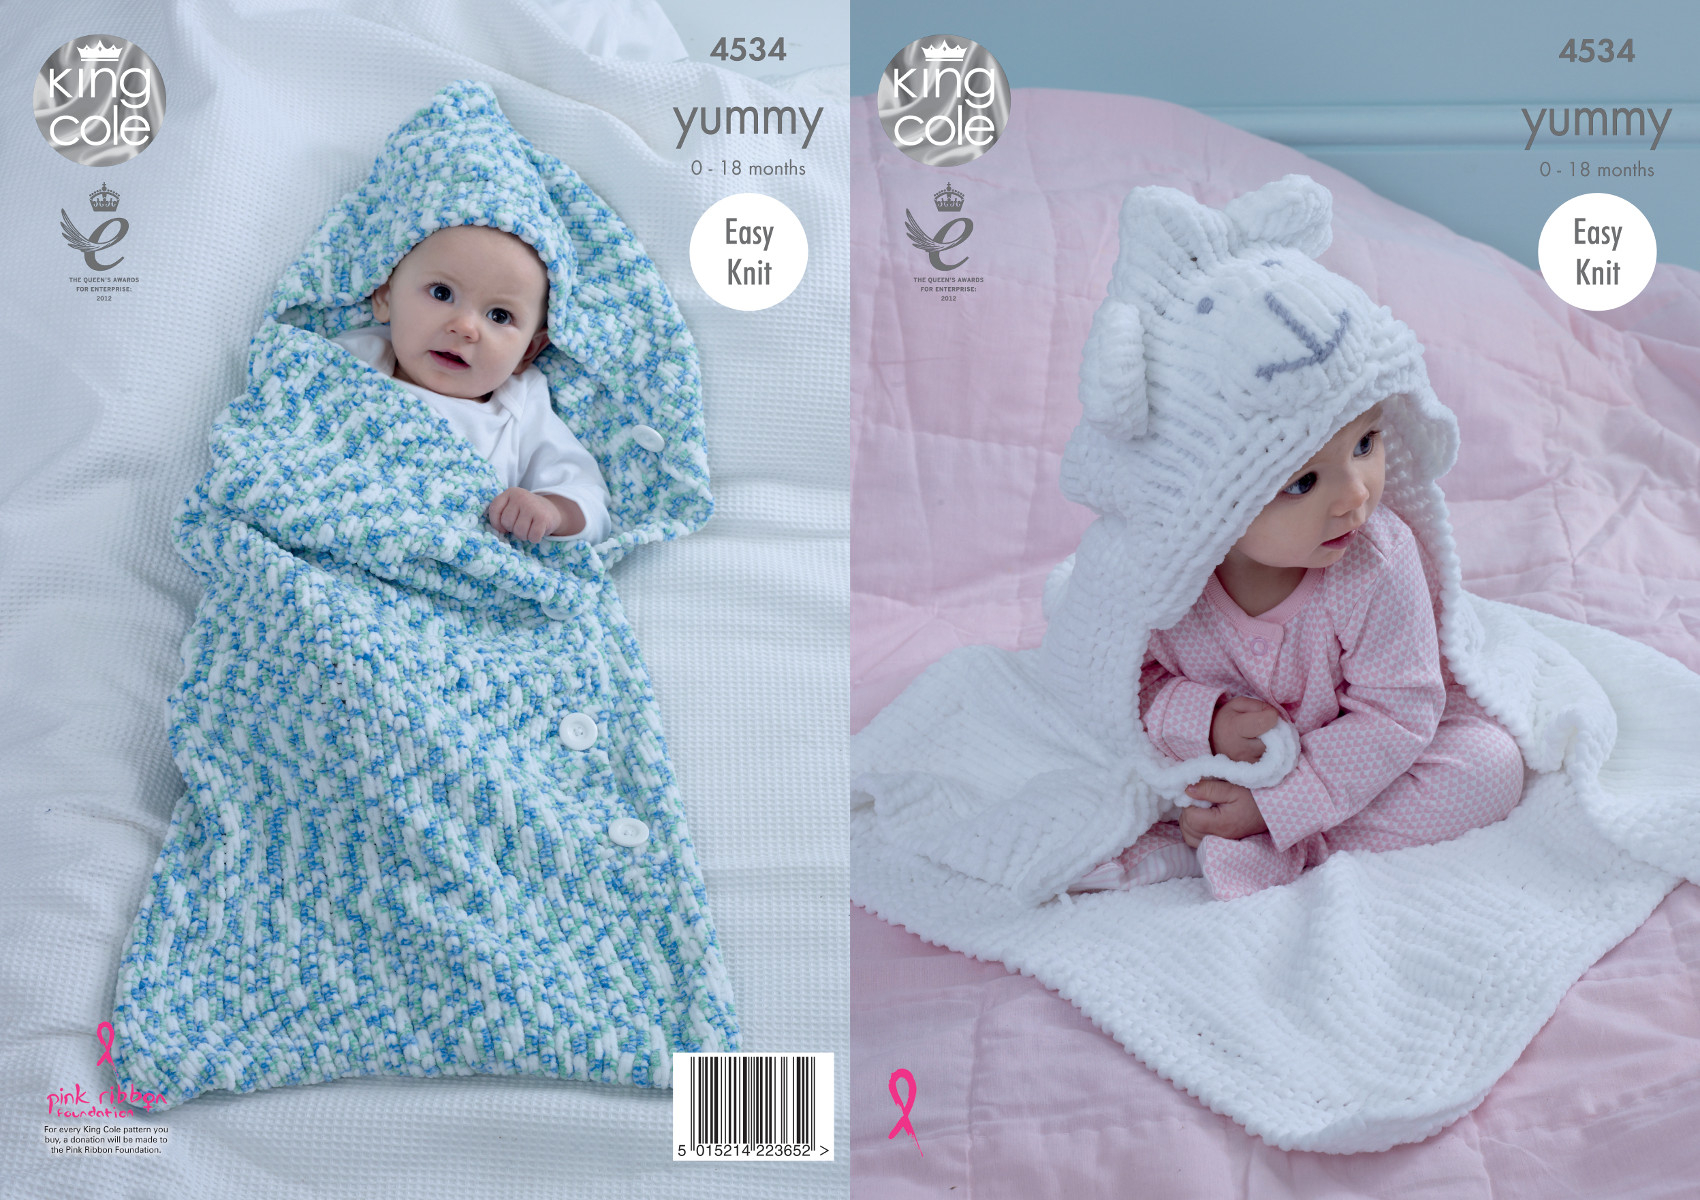 Baby Girl Blanket Knitting Patterns Details About Easy Knit Ba Cocoon Sheep Blanket Knitting Pattern King Cole Yummy Chunky 4534